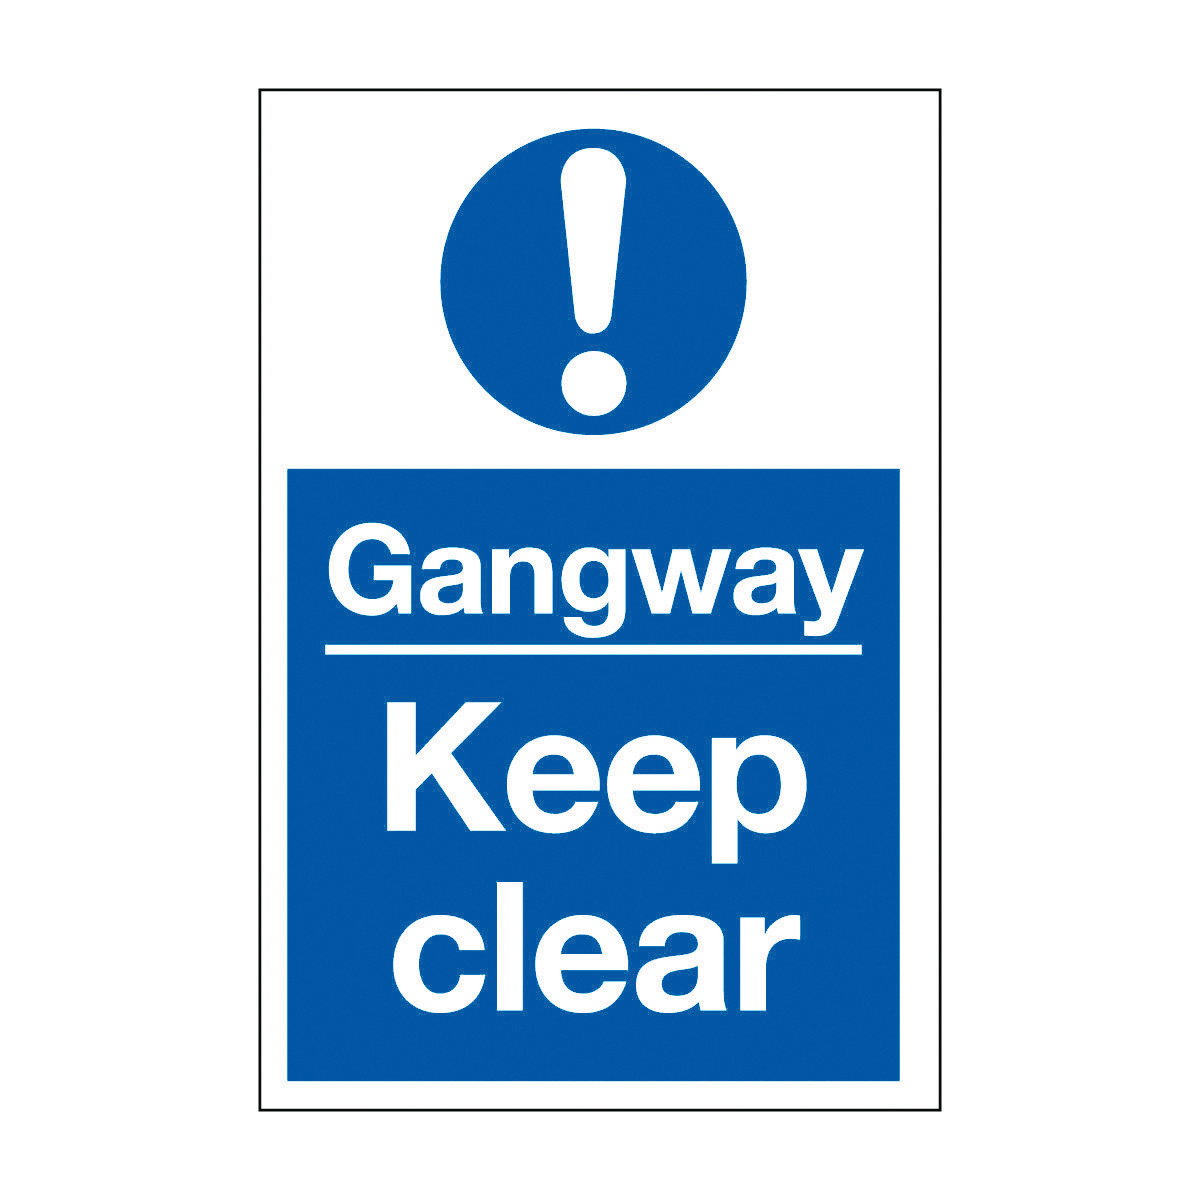 Gangway Keep Clear safety sign